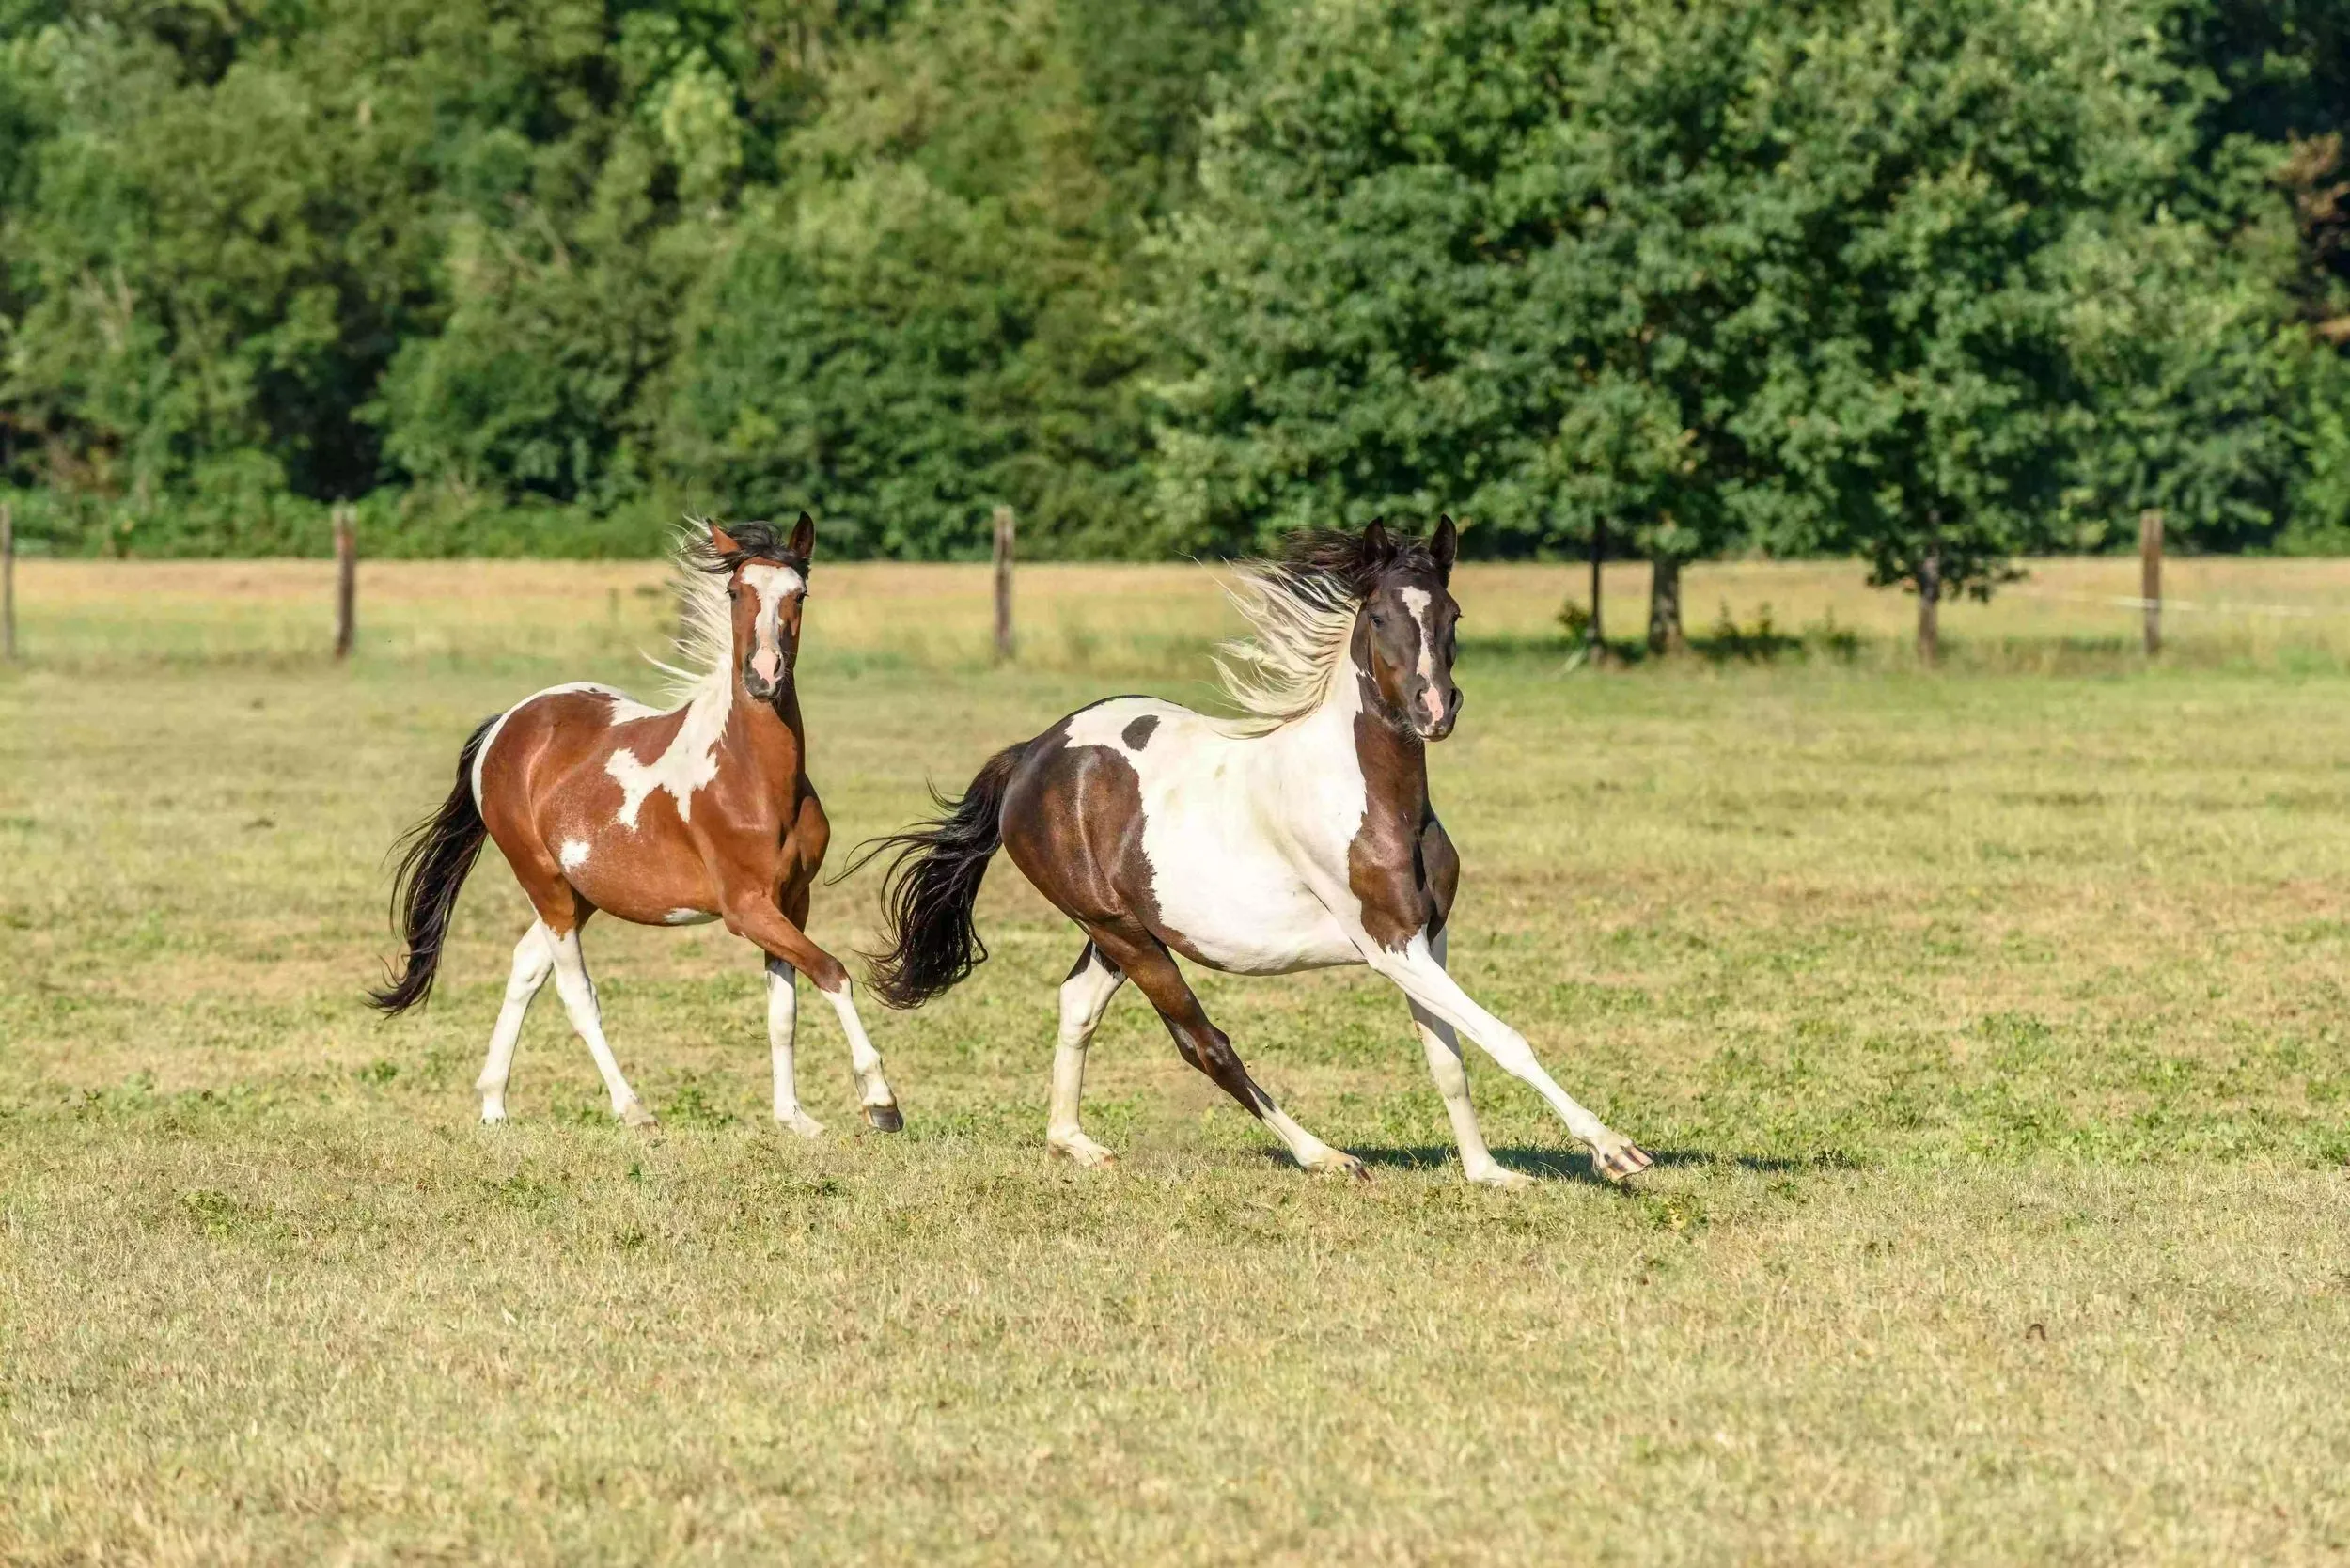 two horses running in a field: Responding made easy